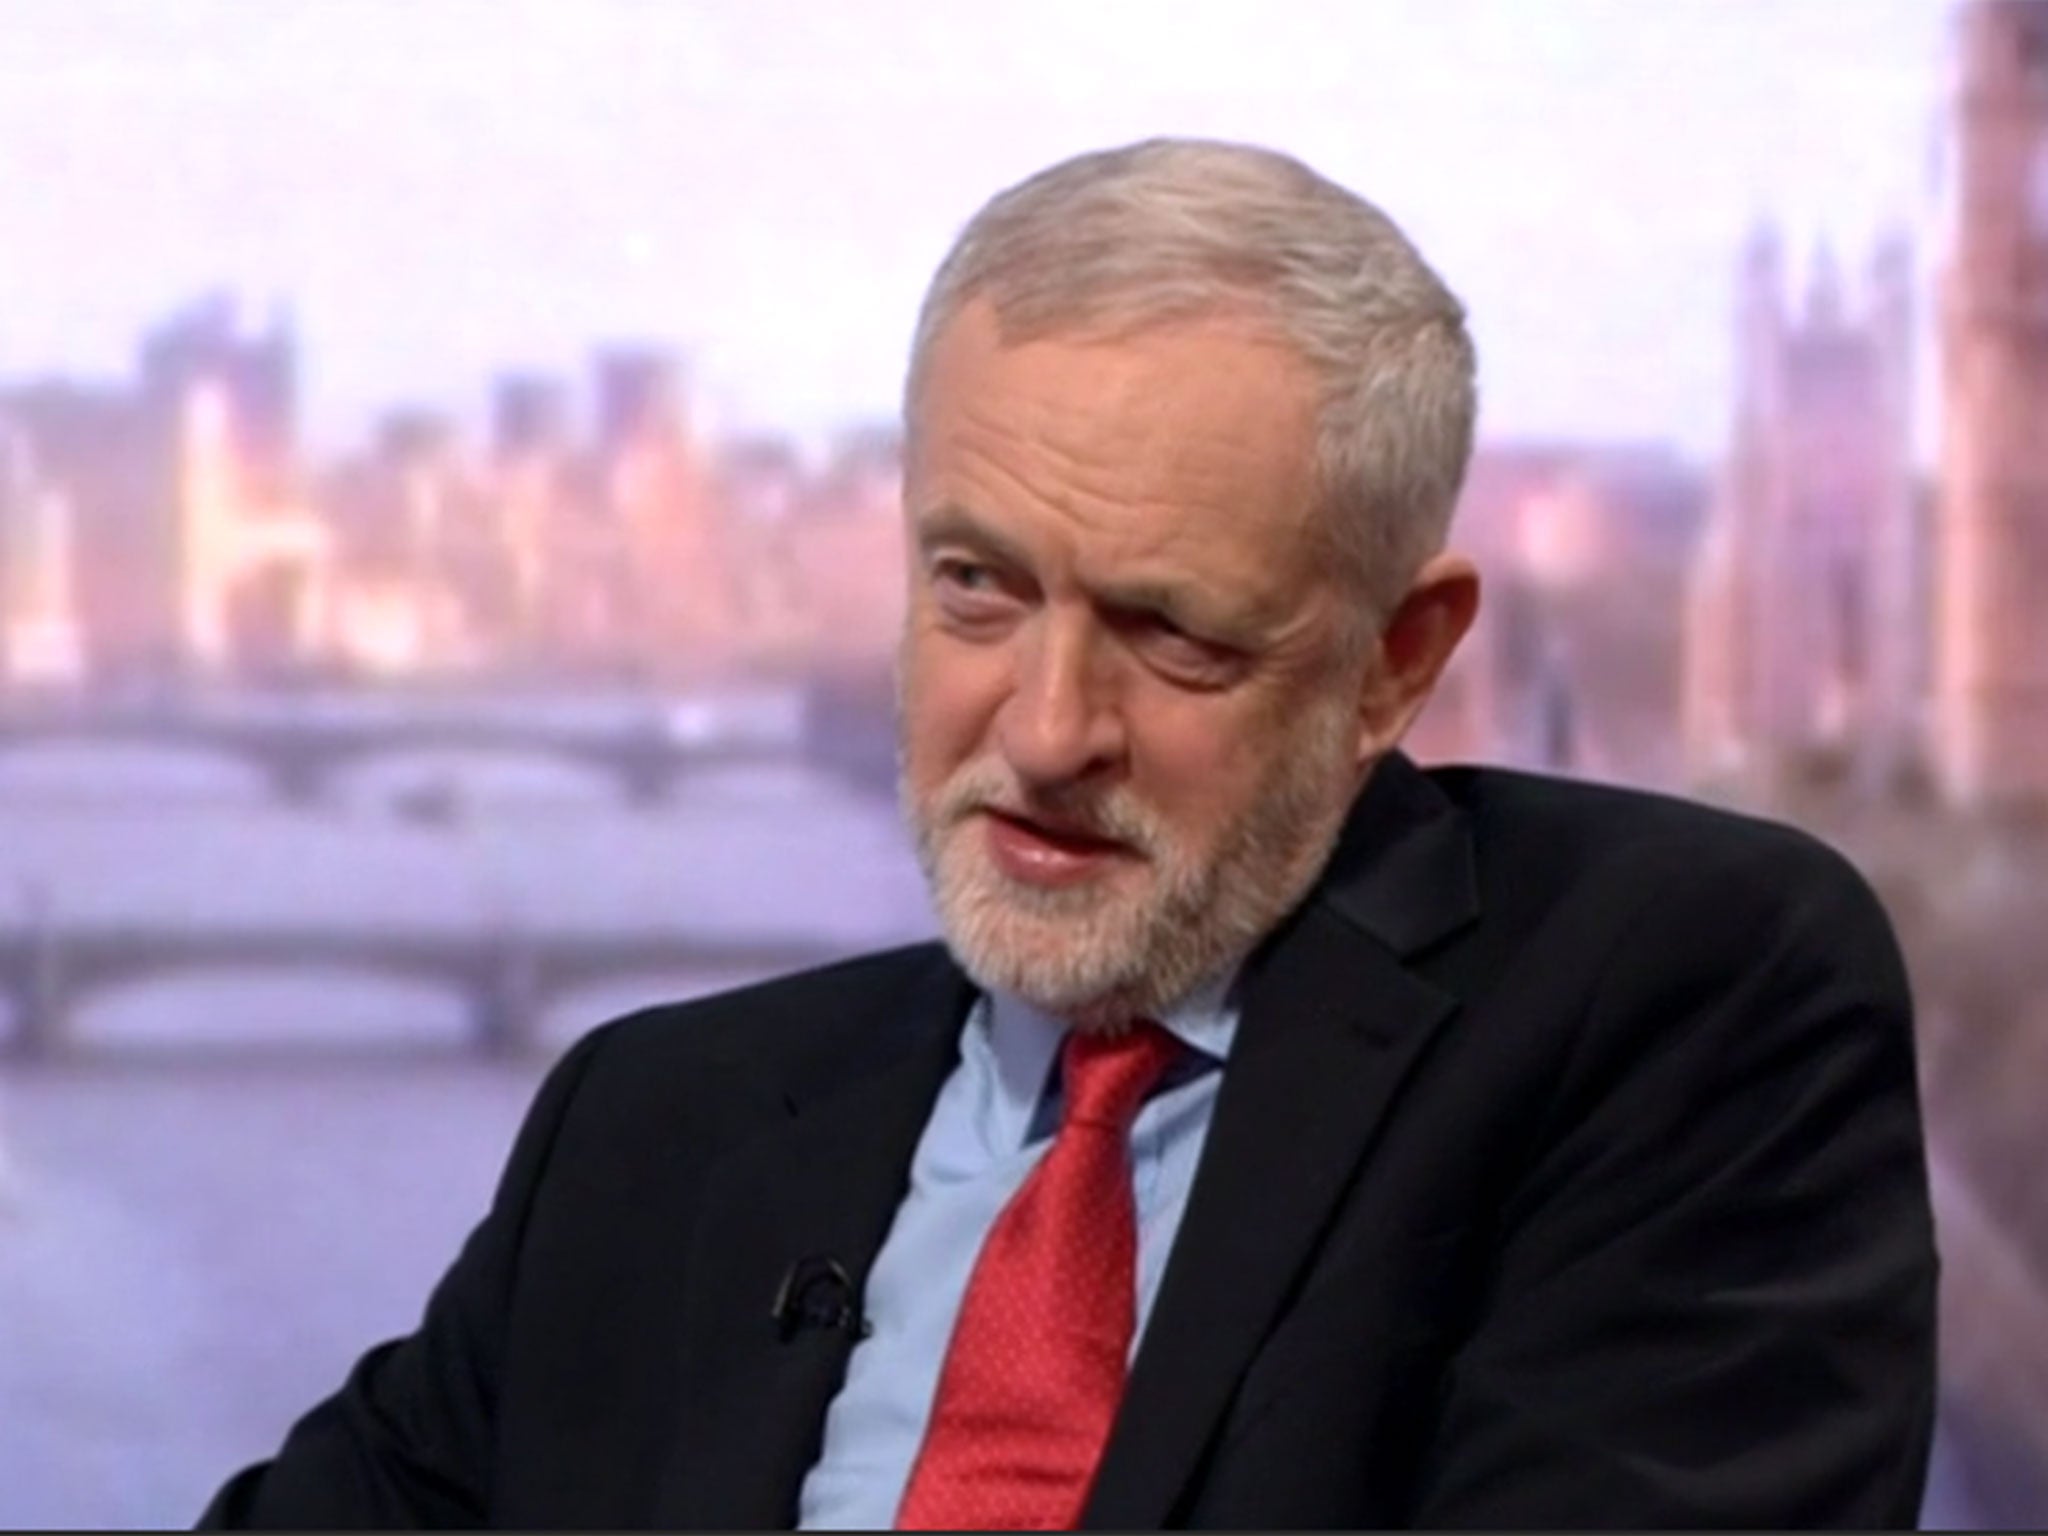 Jeremy Corbyn appearing on the Andrew Marr Show on 15 January 2017